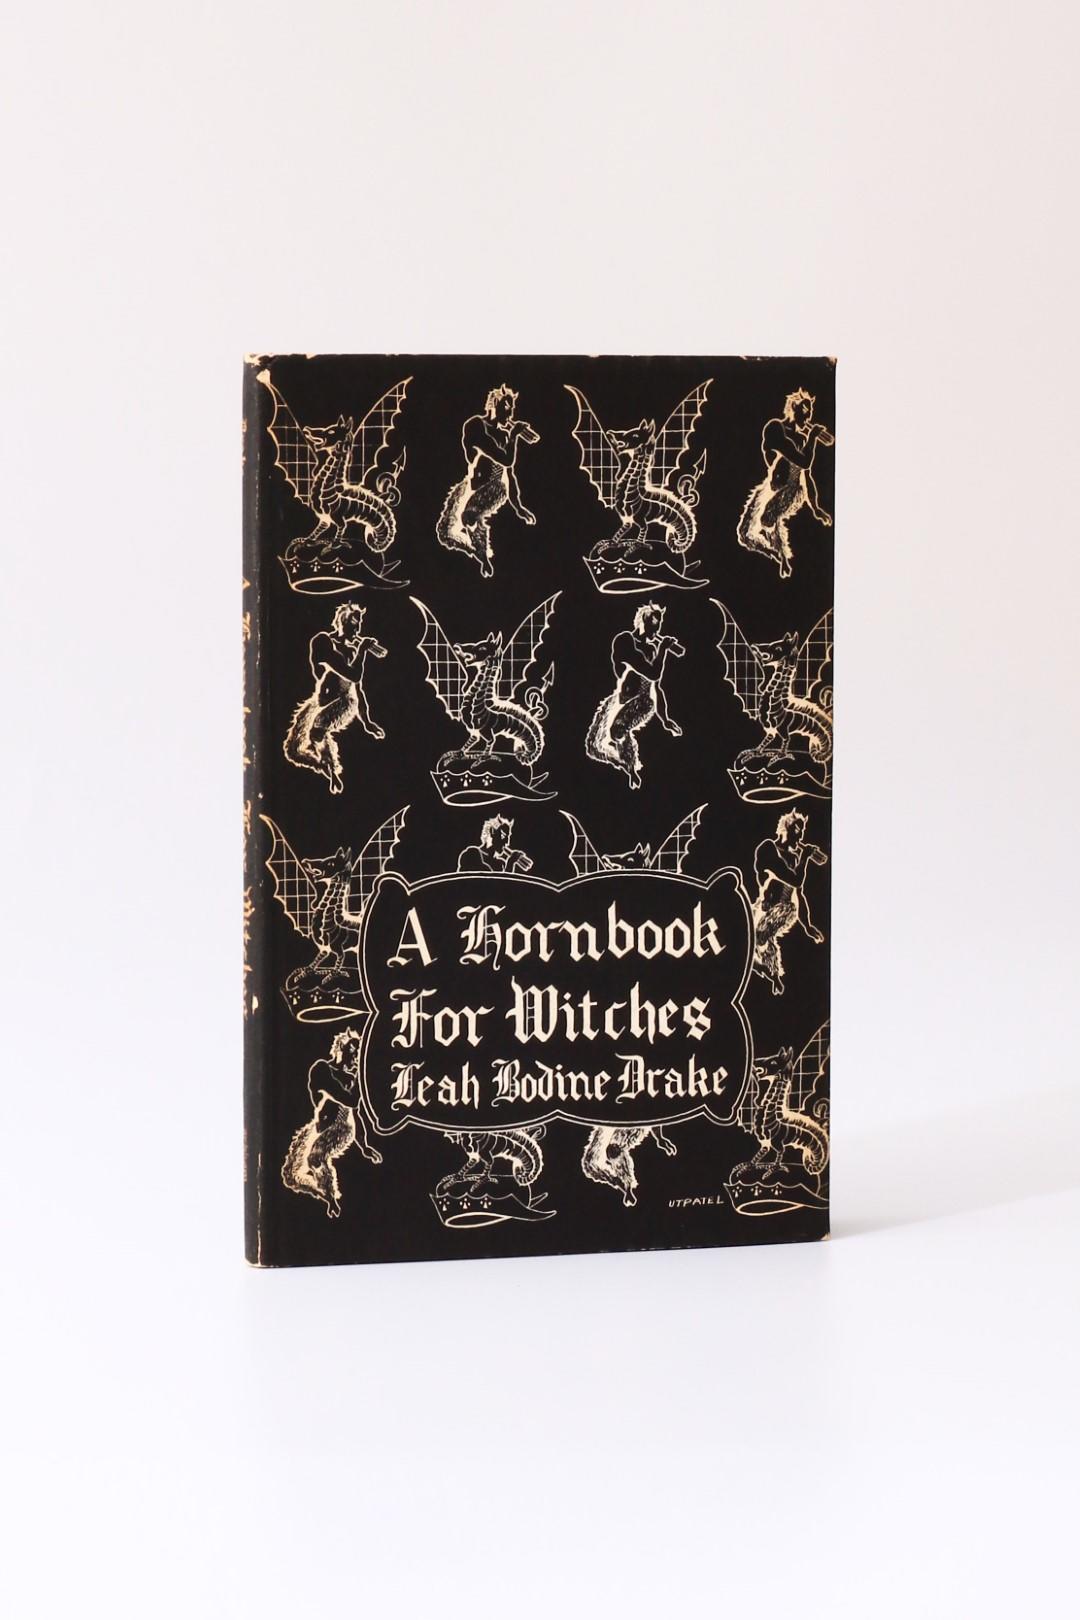 Leah Bodine Drake - A Hornbook for Witches - Arkham House, 1950, First Edition.